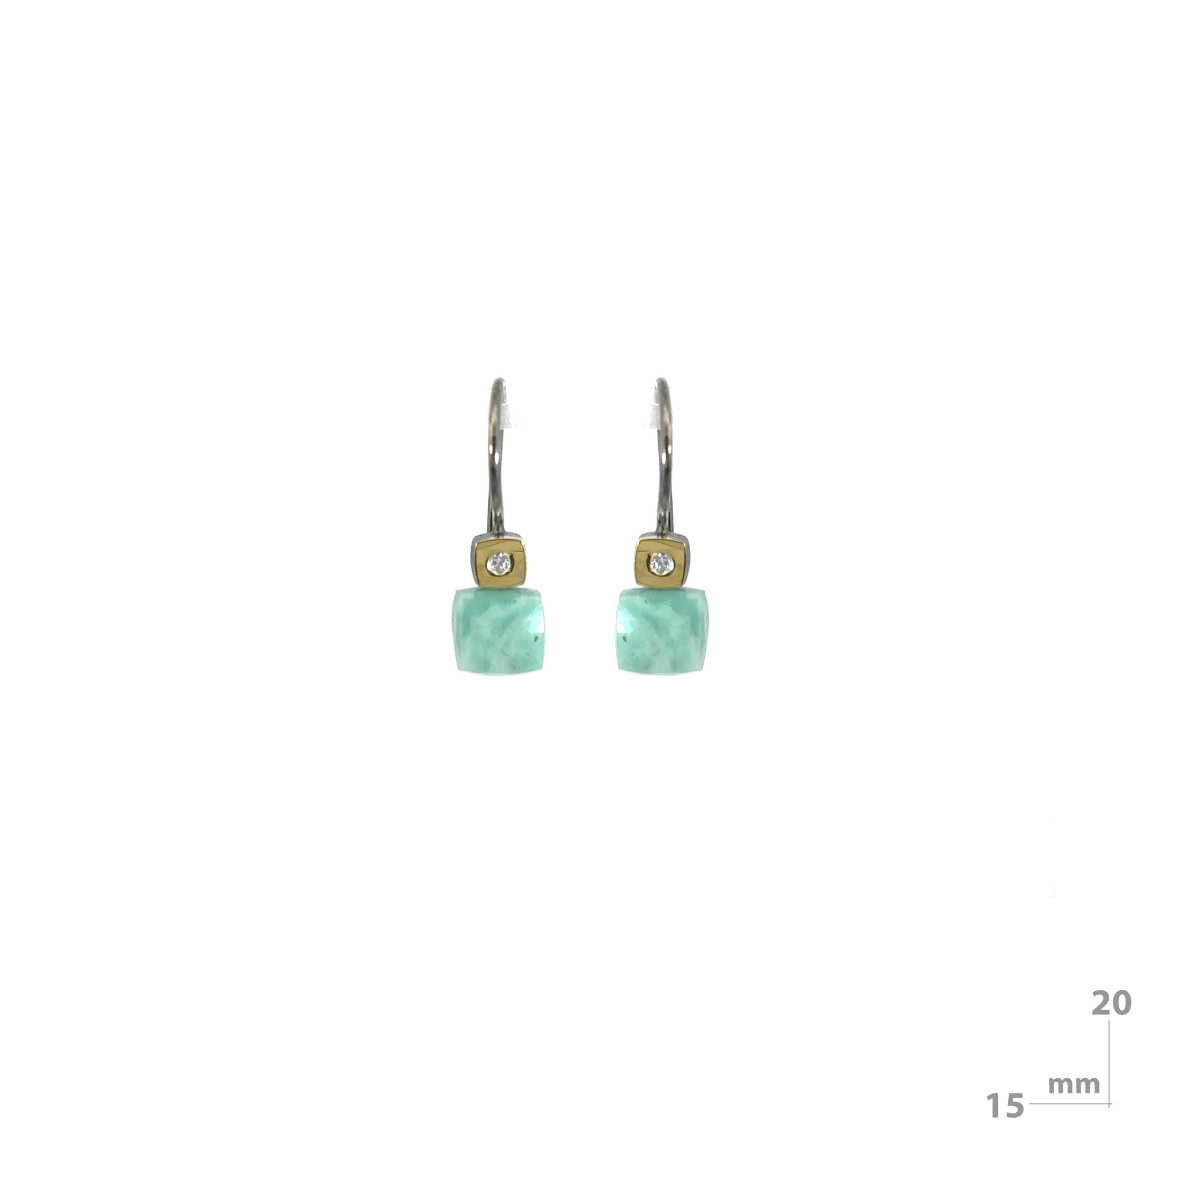 Earrings made of rhodium-plated silver, gold, brilliant and amazonite